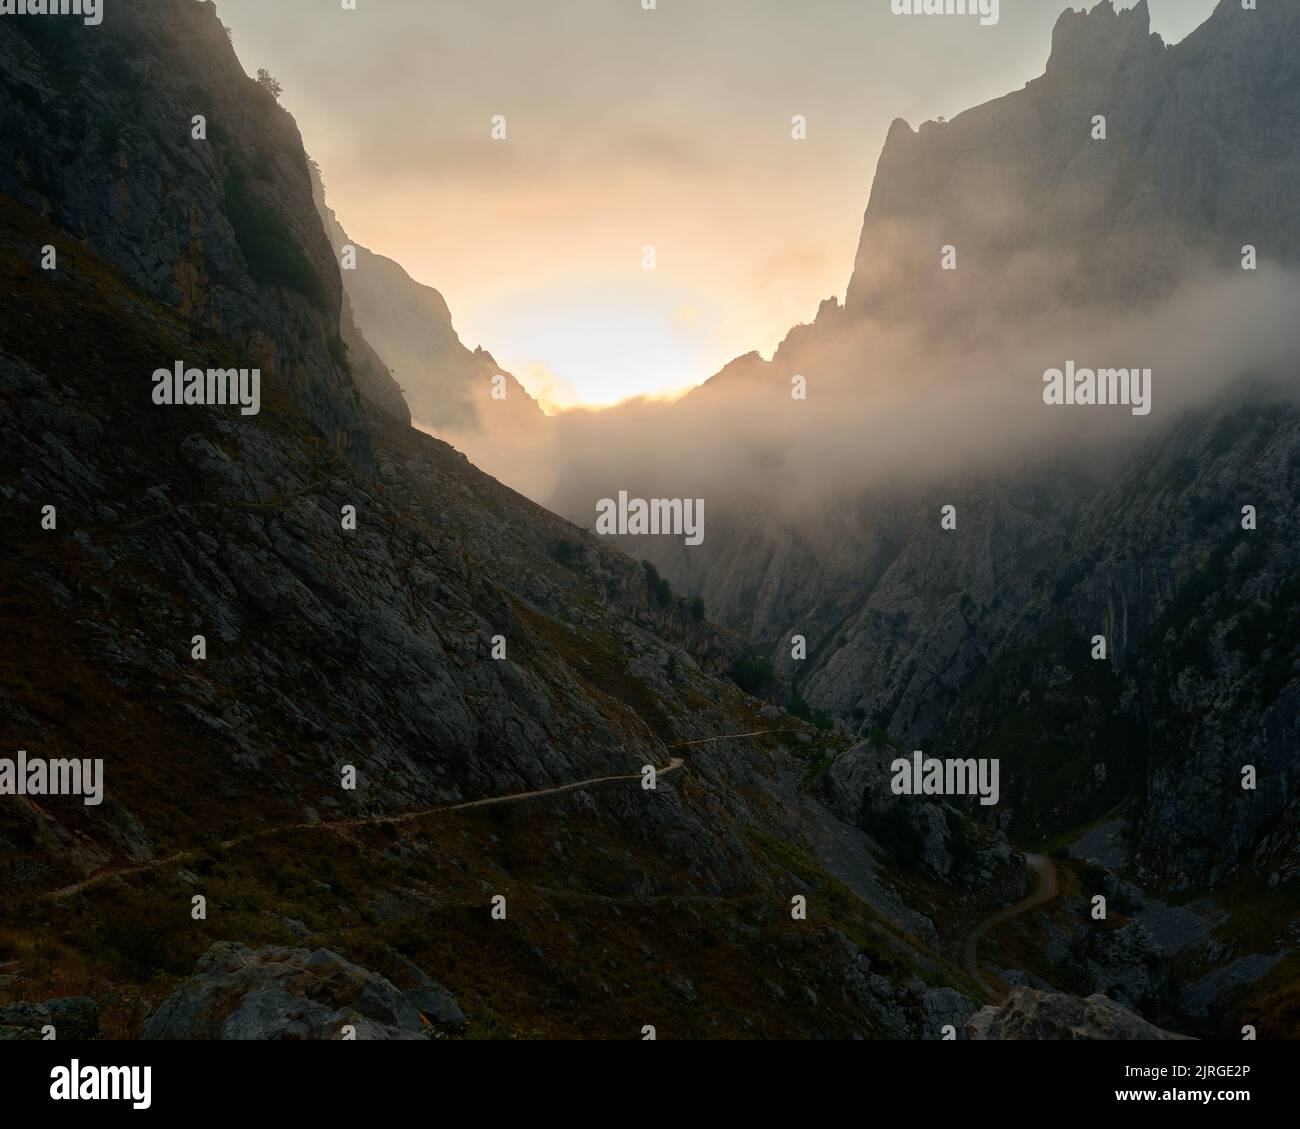 panorama of a mountain path through the interior of a canyon with the lights and mist of sunrise in the background Stock Photo